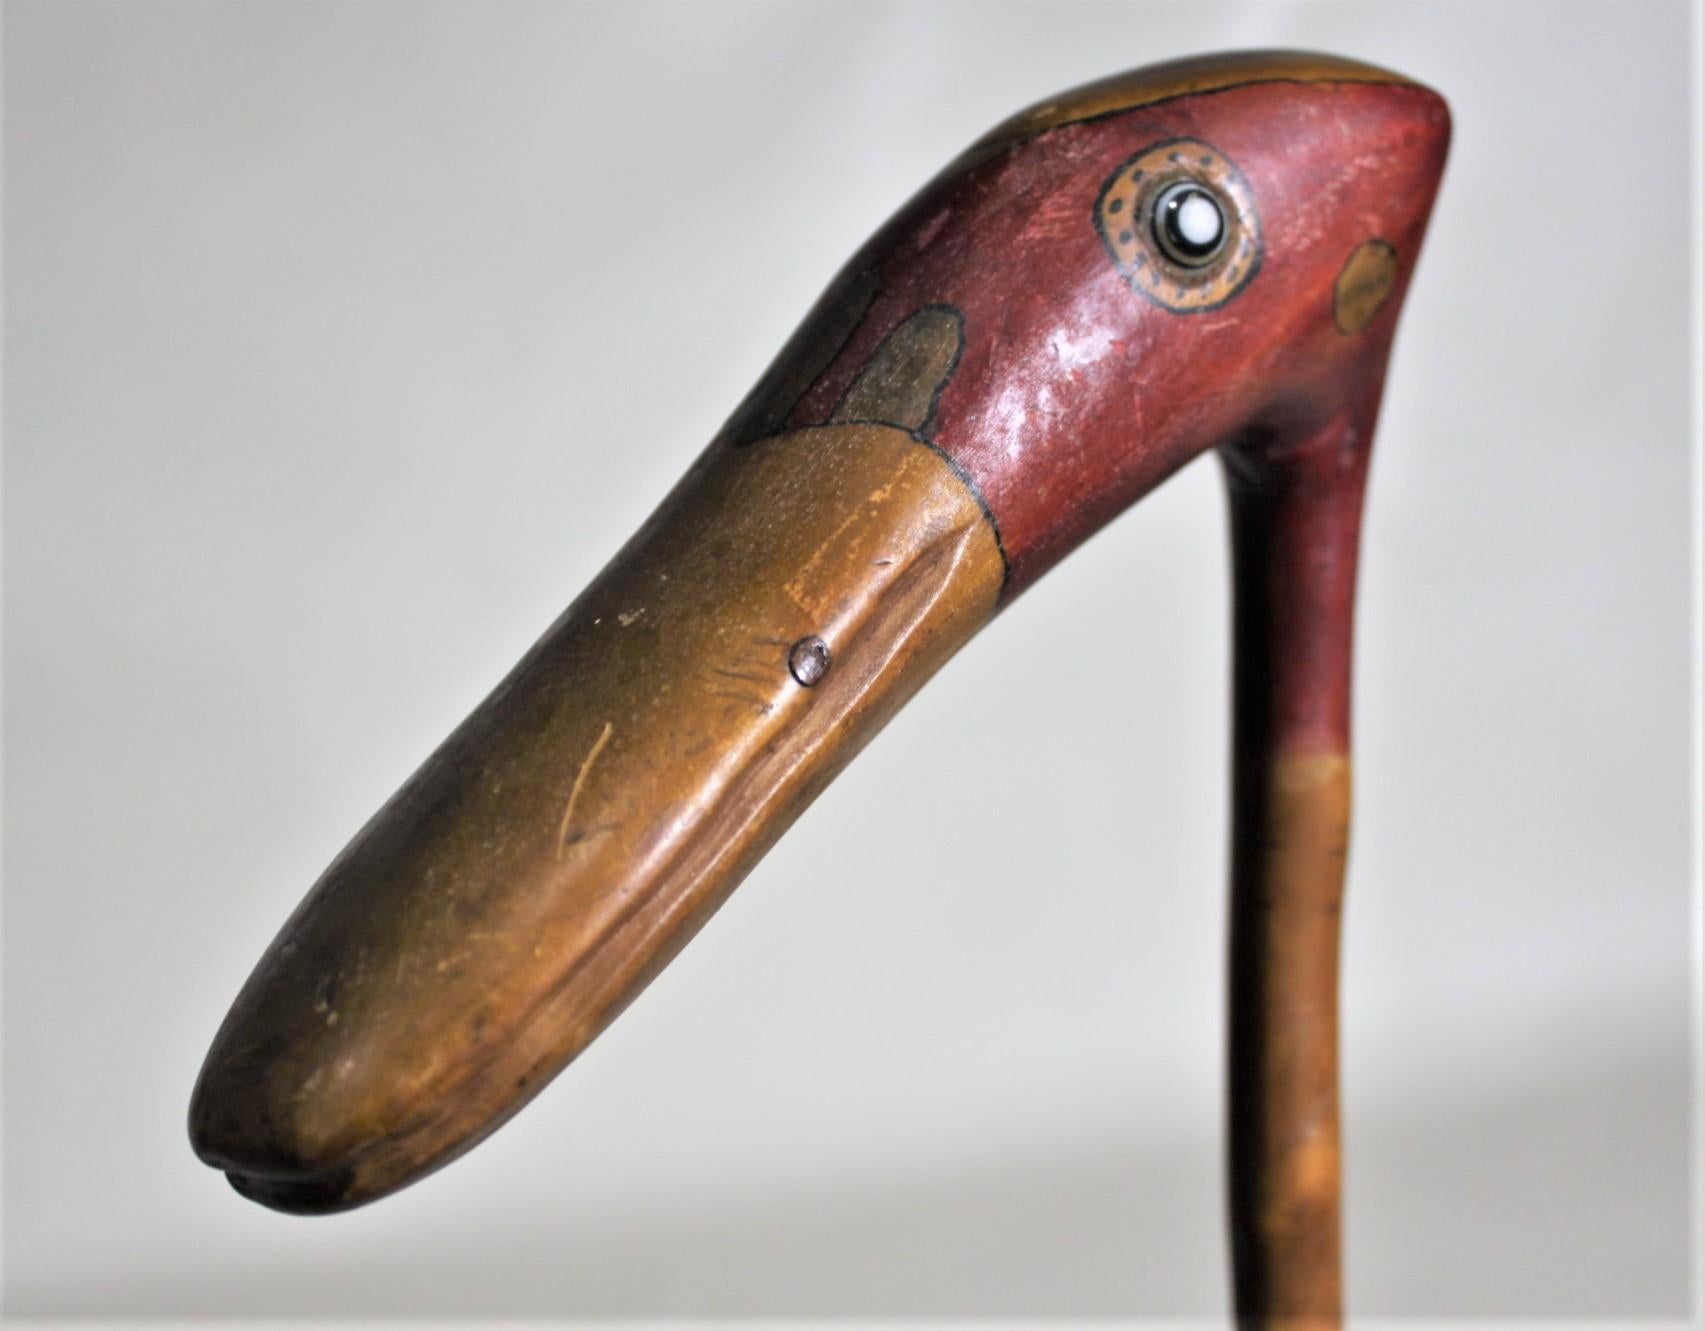 This unique and whimsical Folk Art walking stick is unsigned, but presumed to have been made in the United States in approximately 1930. The handle of this cane has been hand painted and hand carved to resemble an exotic bird or animal of some sort